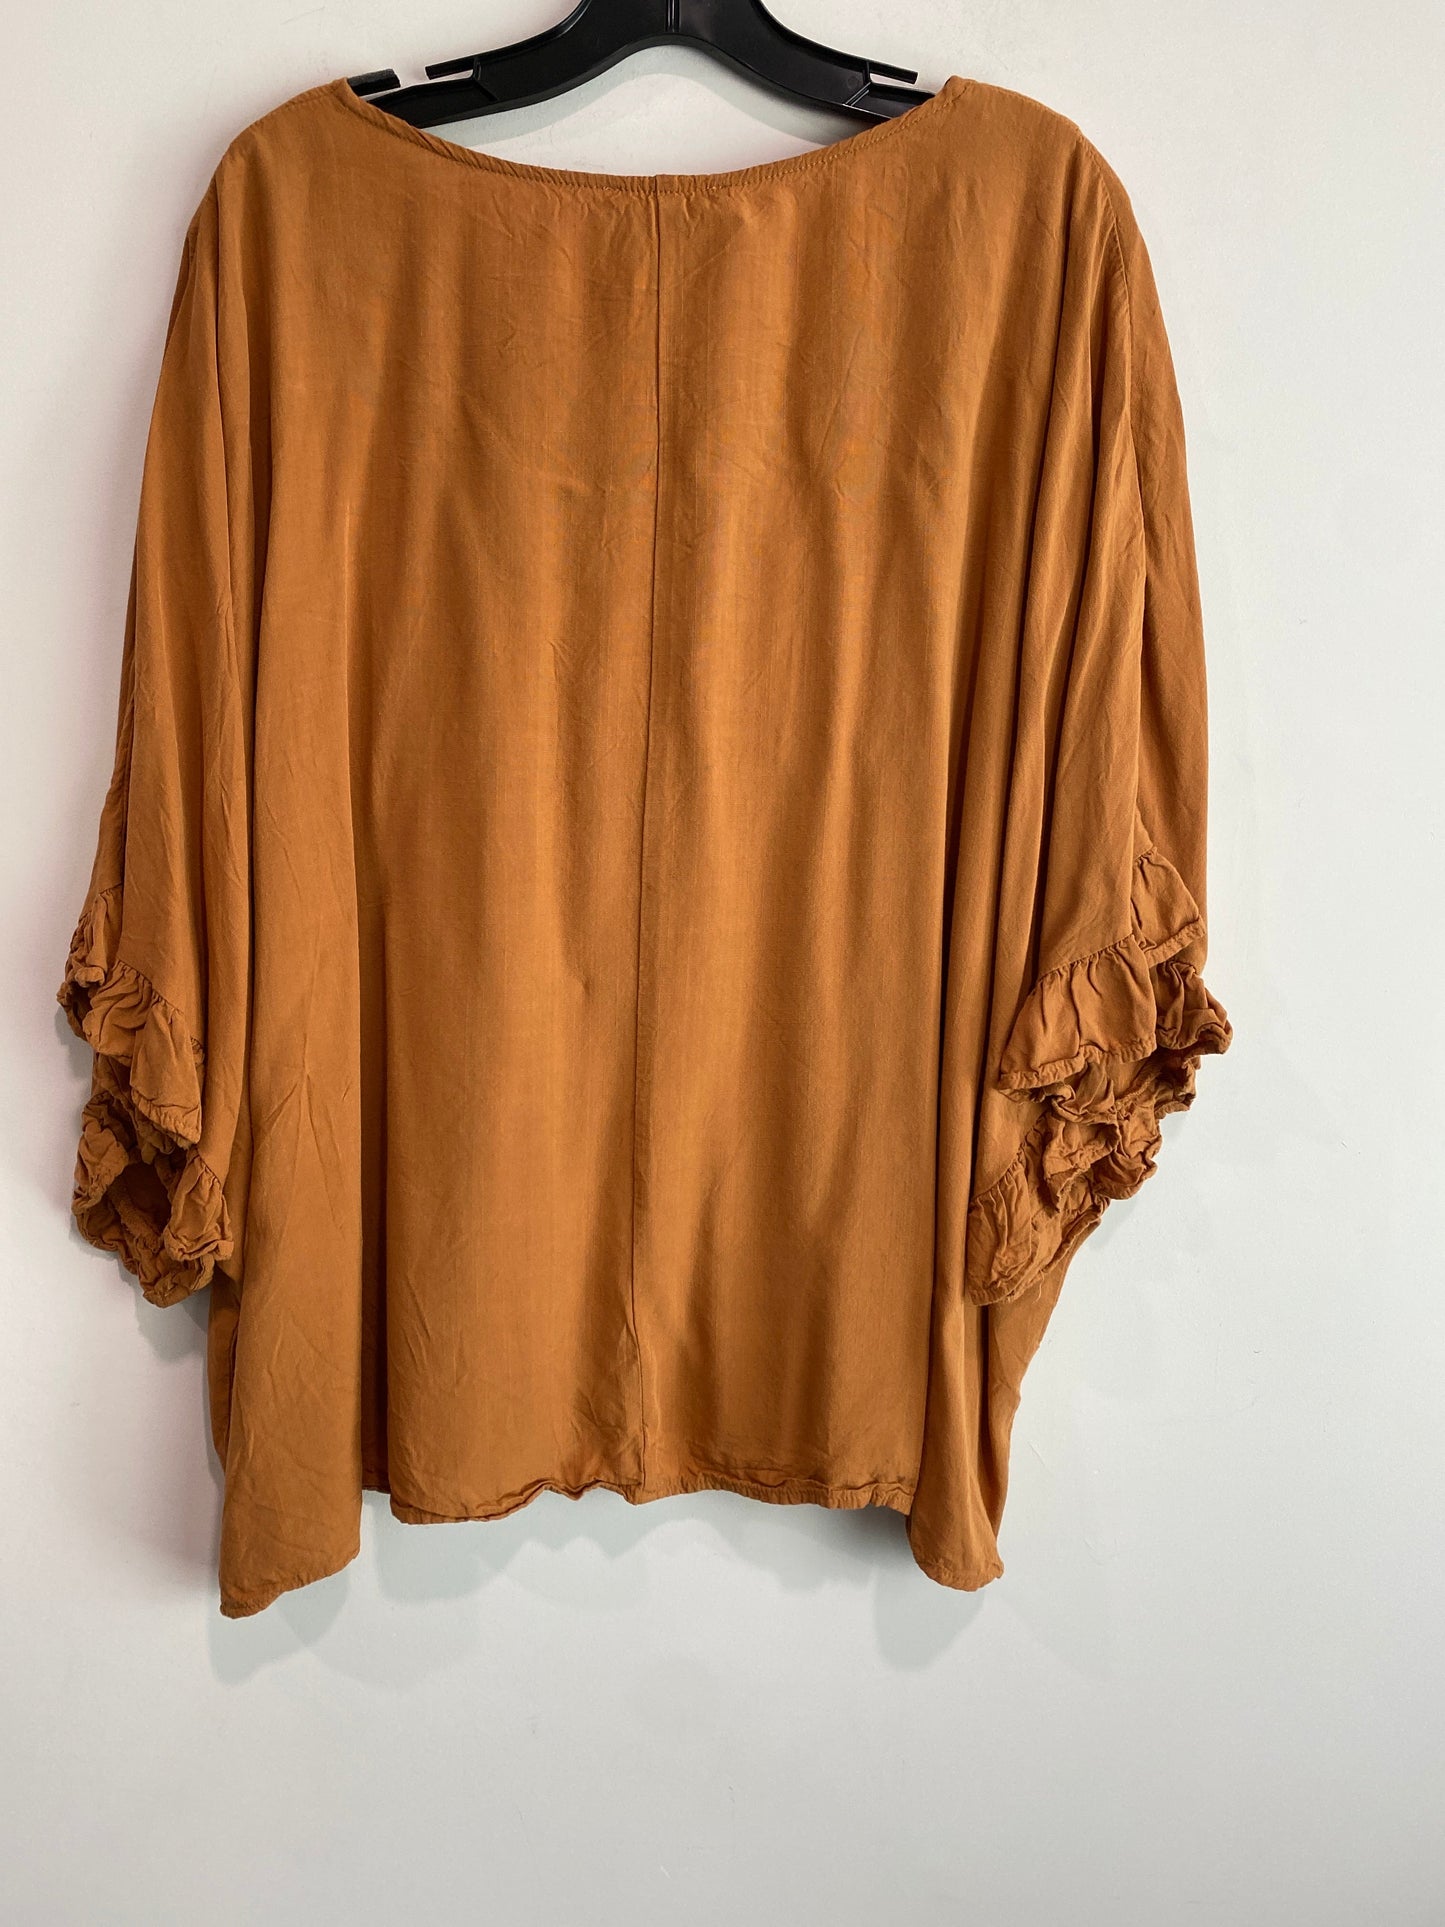 Brown Top Short Sleeve Andree By Unit, Size 2x